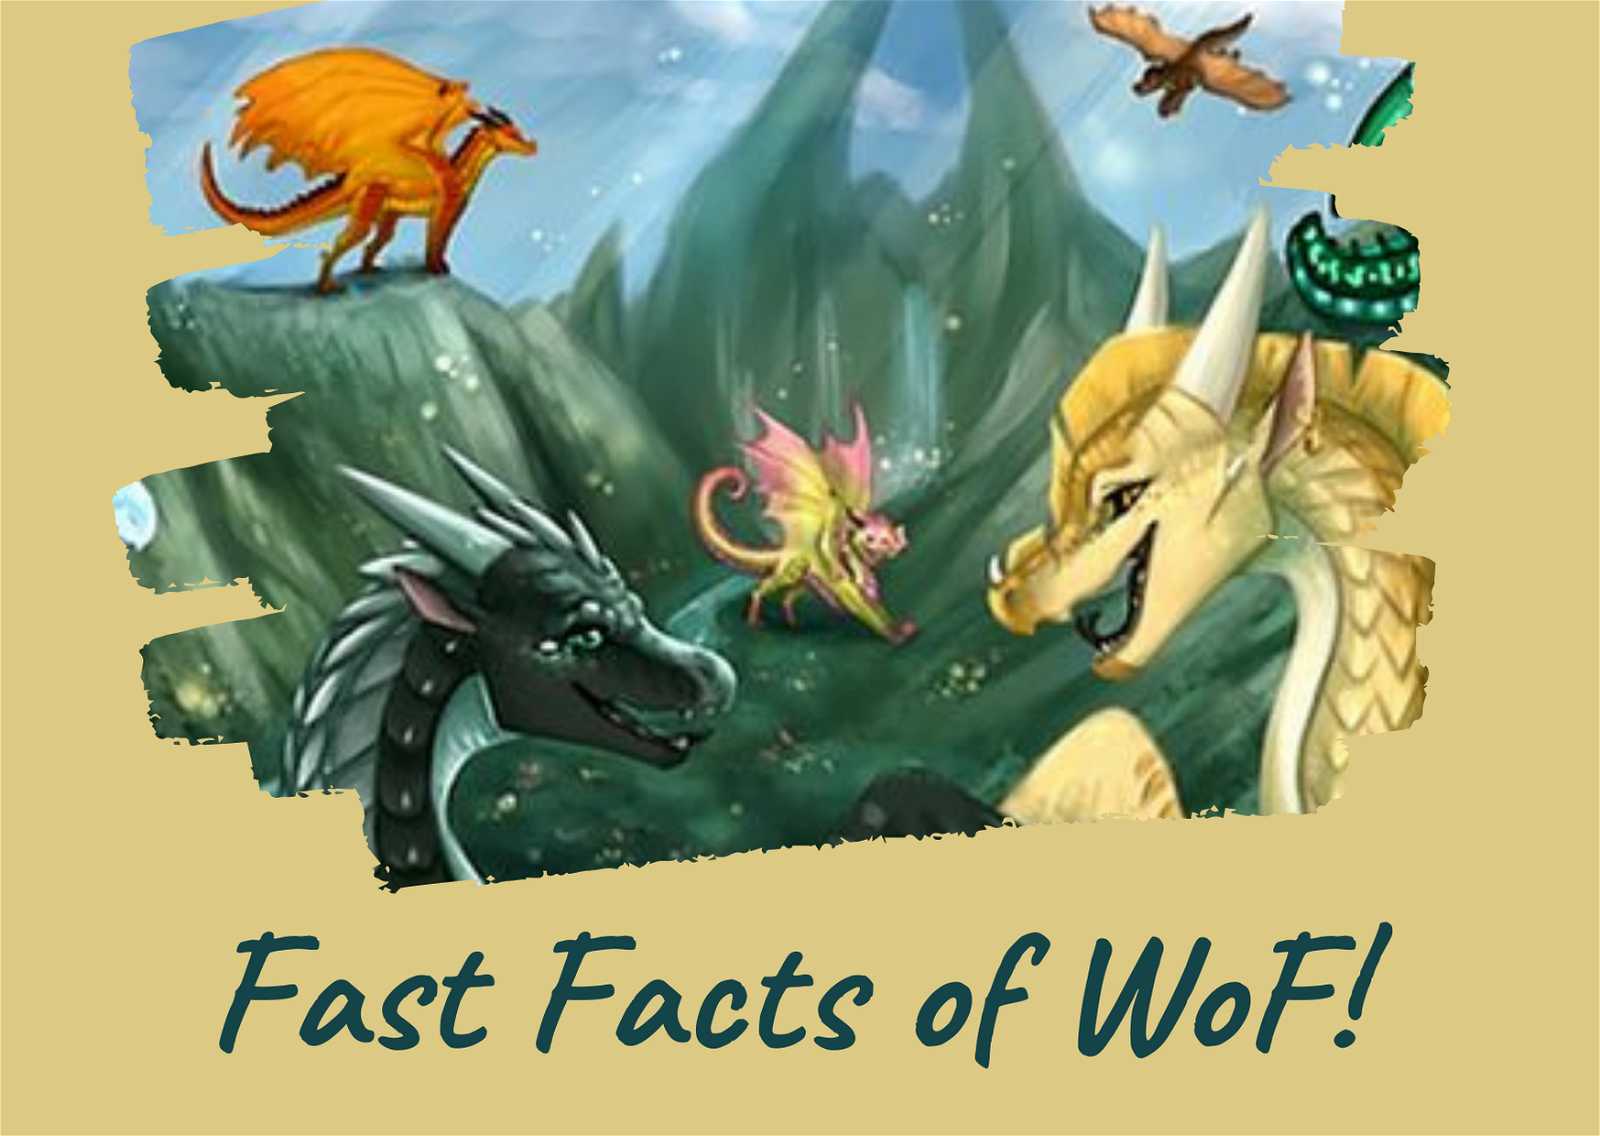 Fast Facts!